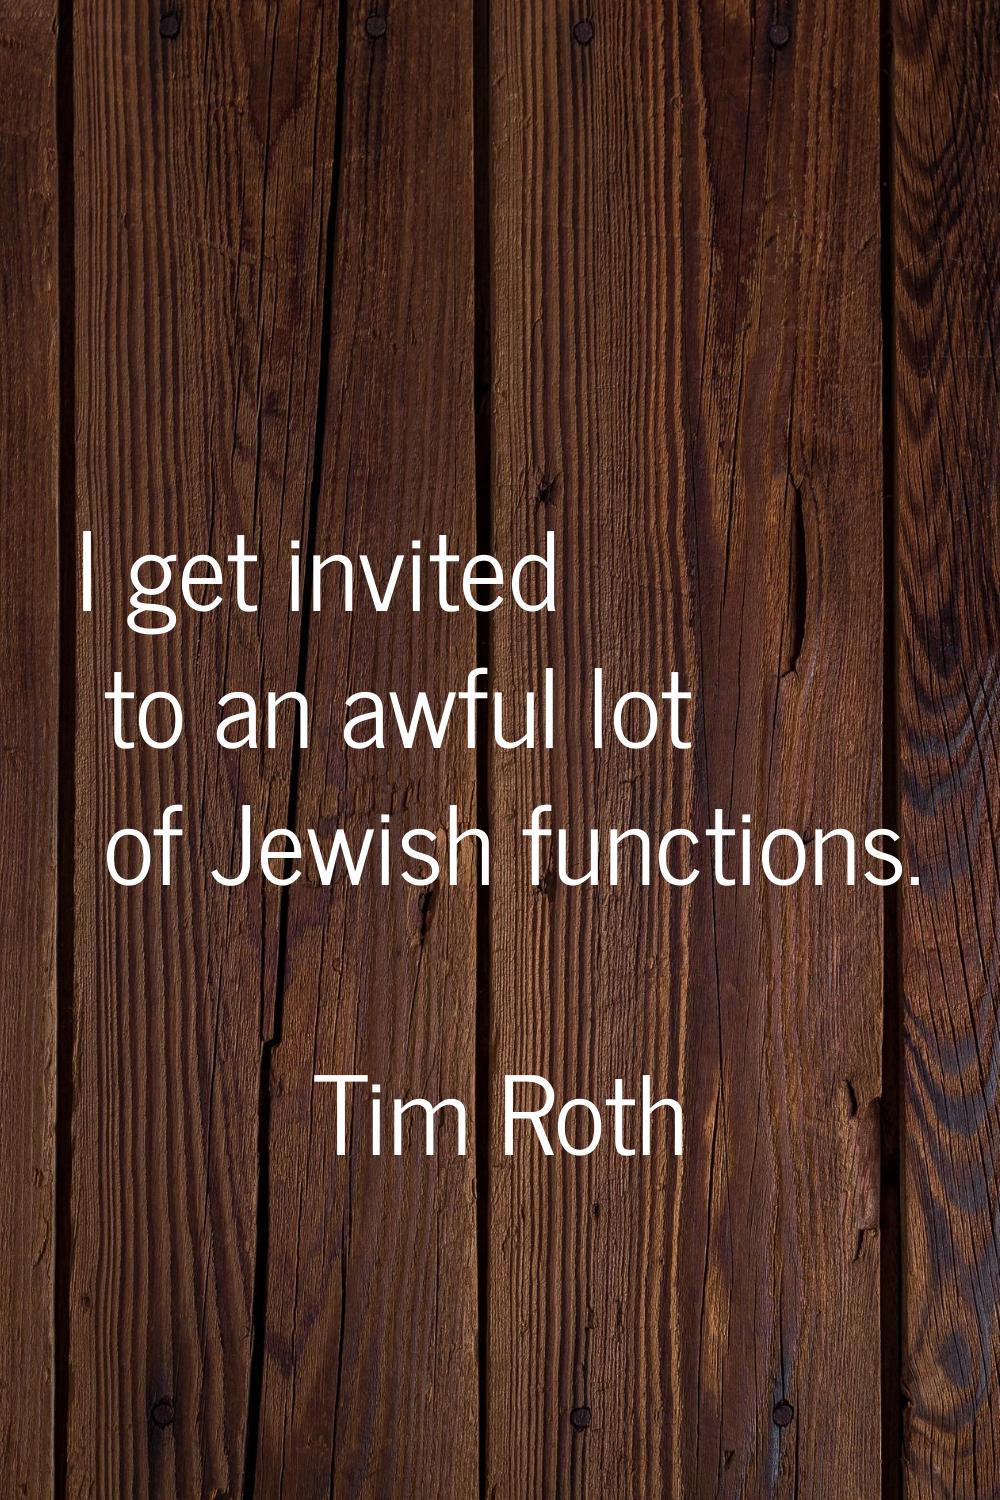 I get invited to an awful lot of Jewish functions.